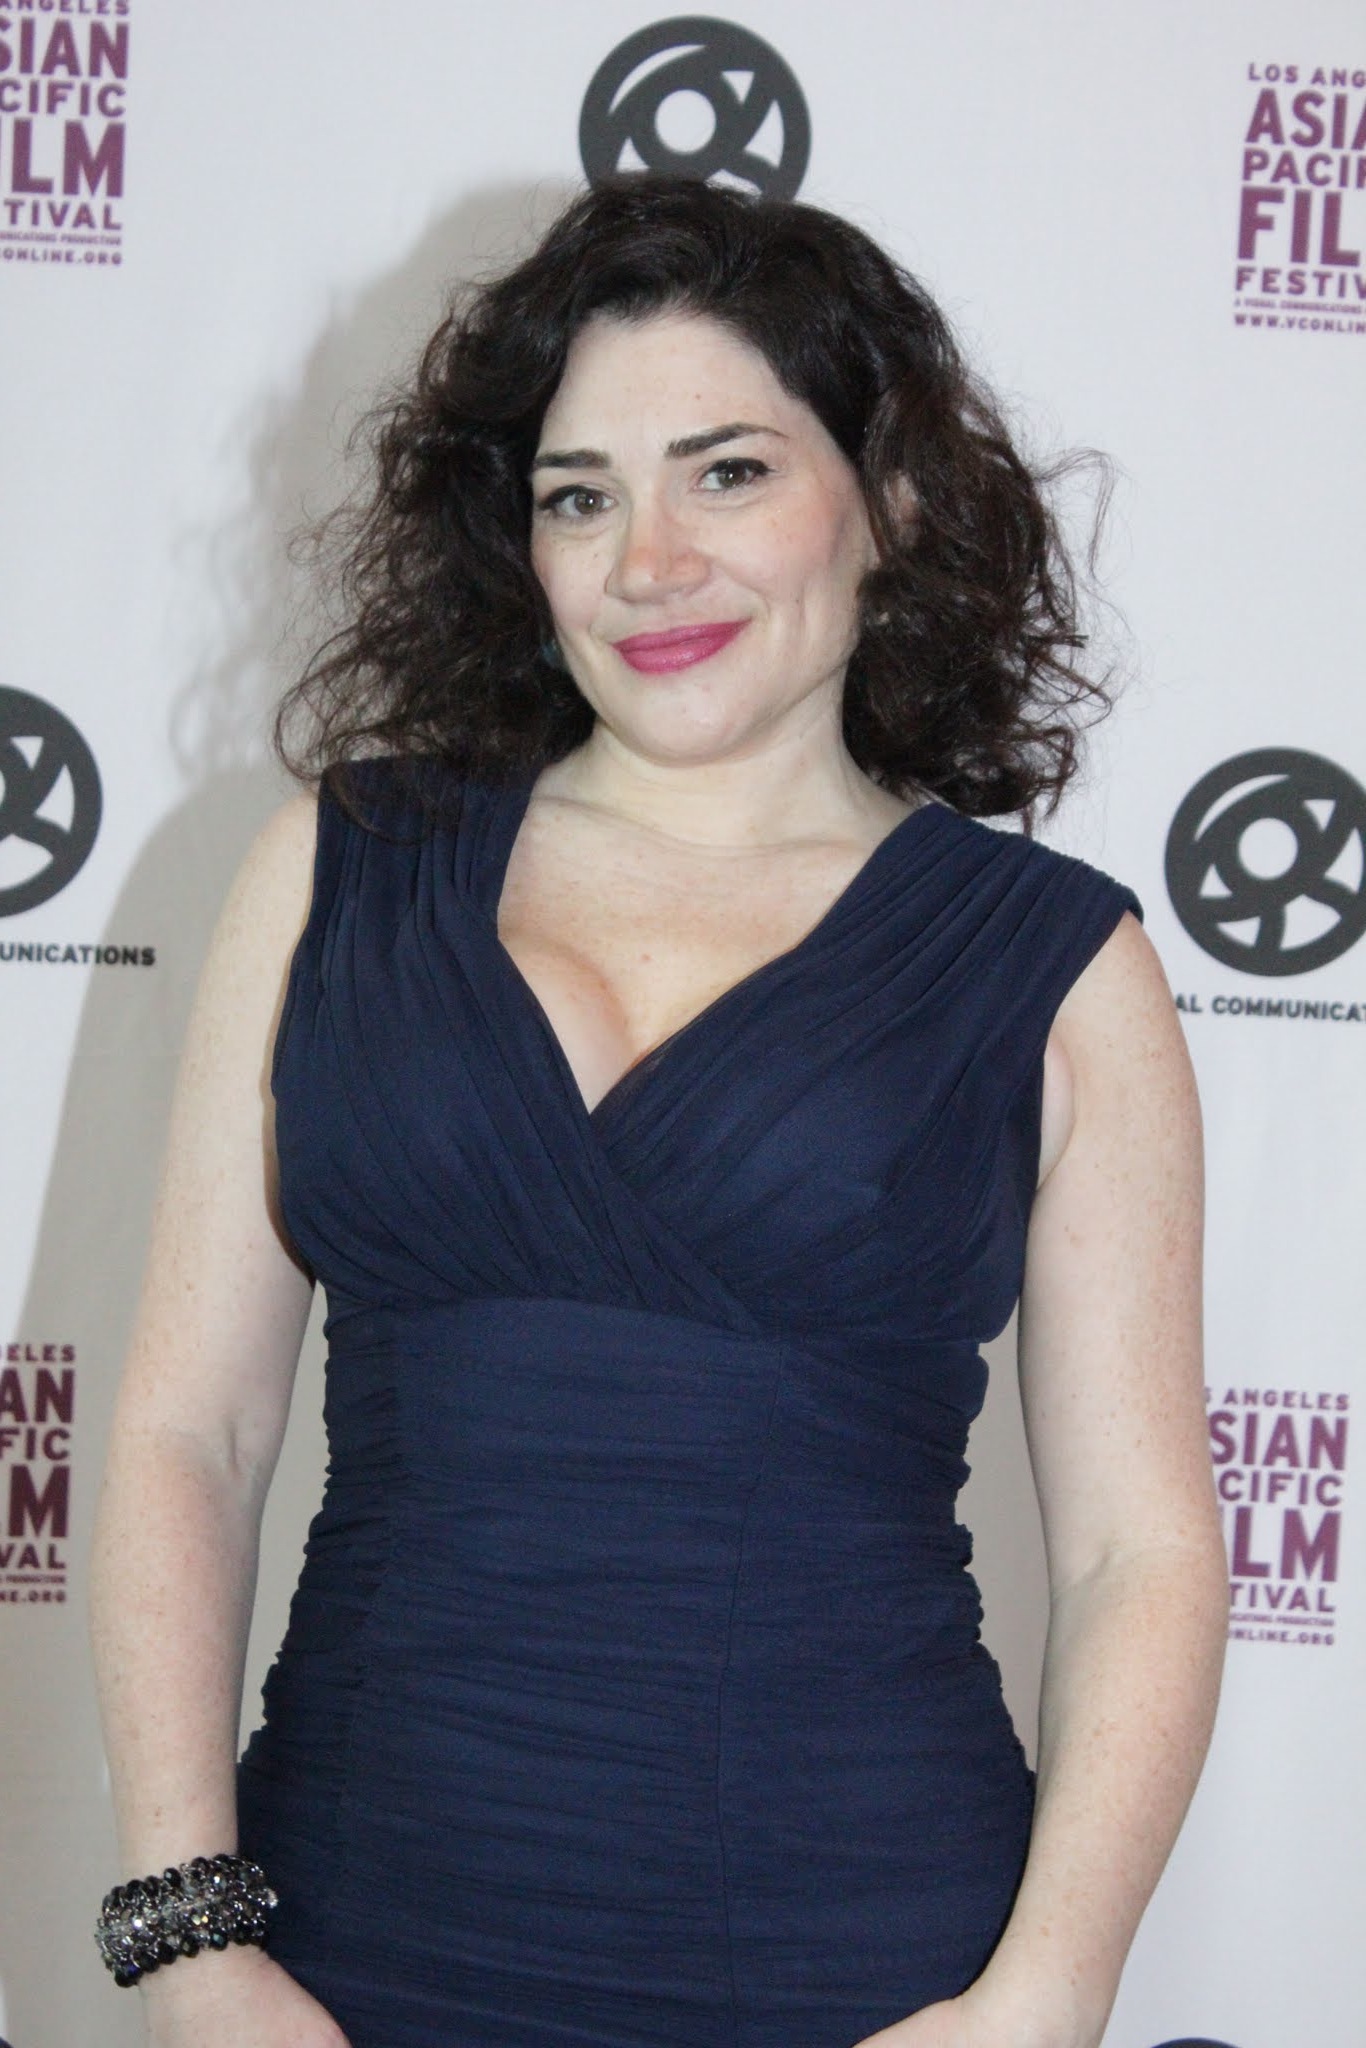 Actress Karen-Eileen Gordon at the Los Angeles Asian Pacific Film Festival (Directors Guild of America)